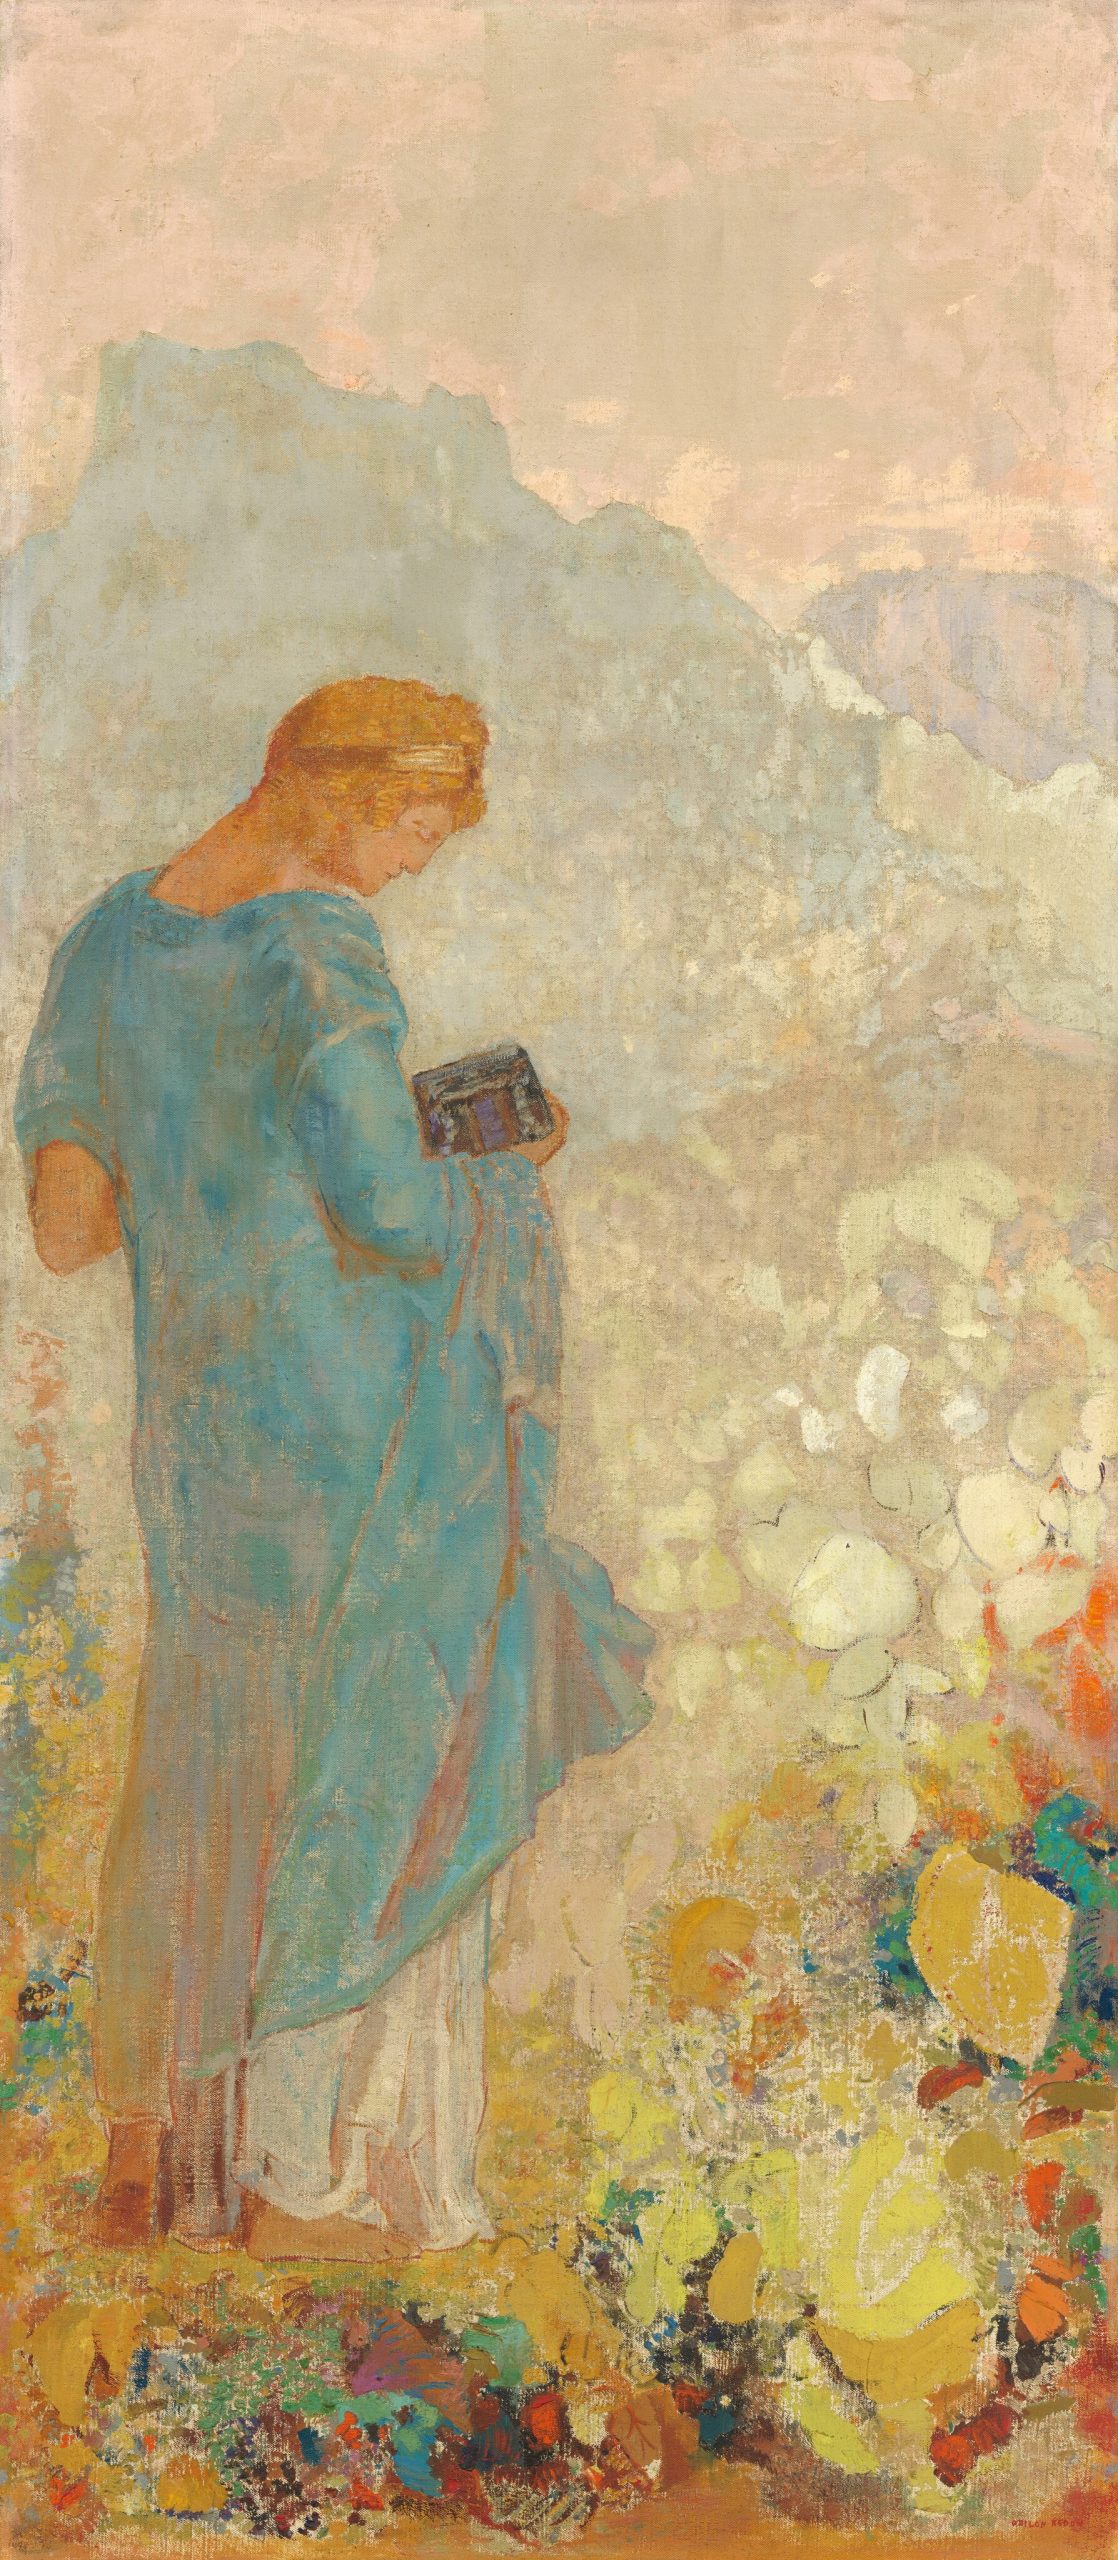 A pale-skinned young woman with copper-orange hair, wearing a turquoise-blue robe, stands in a pastel-infused landscape in this stylized, vertical painting. The woman fills most of the left half of the composition.